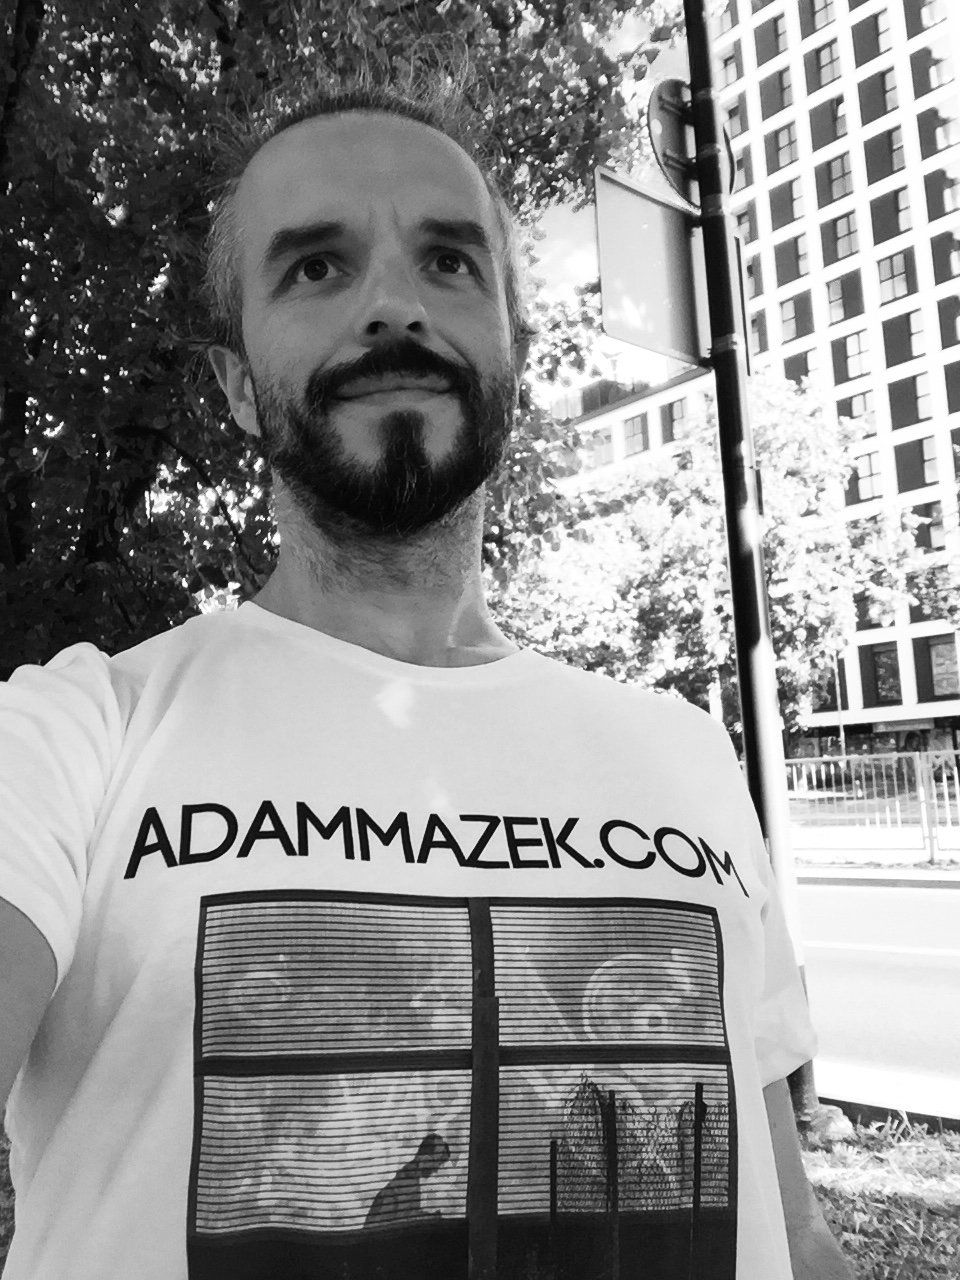 Adam Mazek Photography 2021. Post: "How to look young and beautiful?" Selfie with the www.adammazek.com t-shirt. Warsaw street photography.